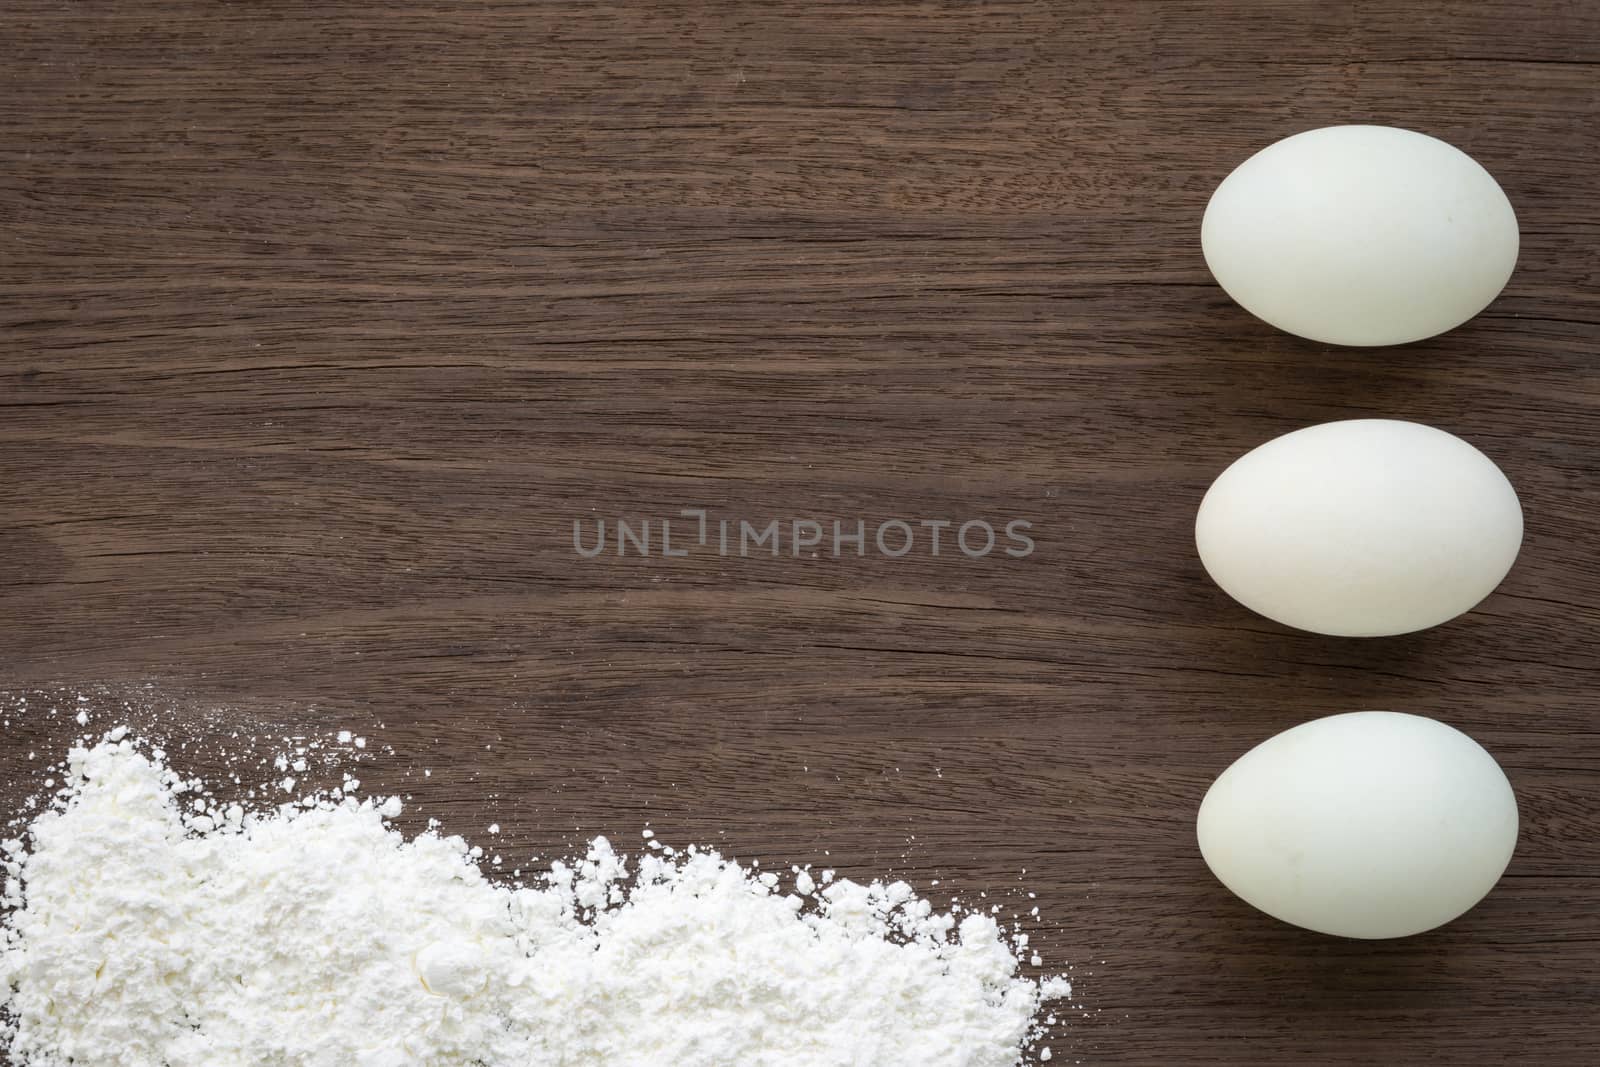 Top view of cooking background with three eggs and flour on vintage natural wood table. Rough texture and rustic surface with free text space.